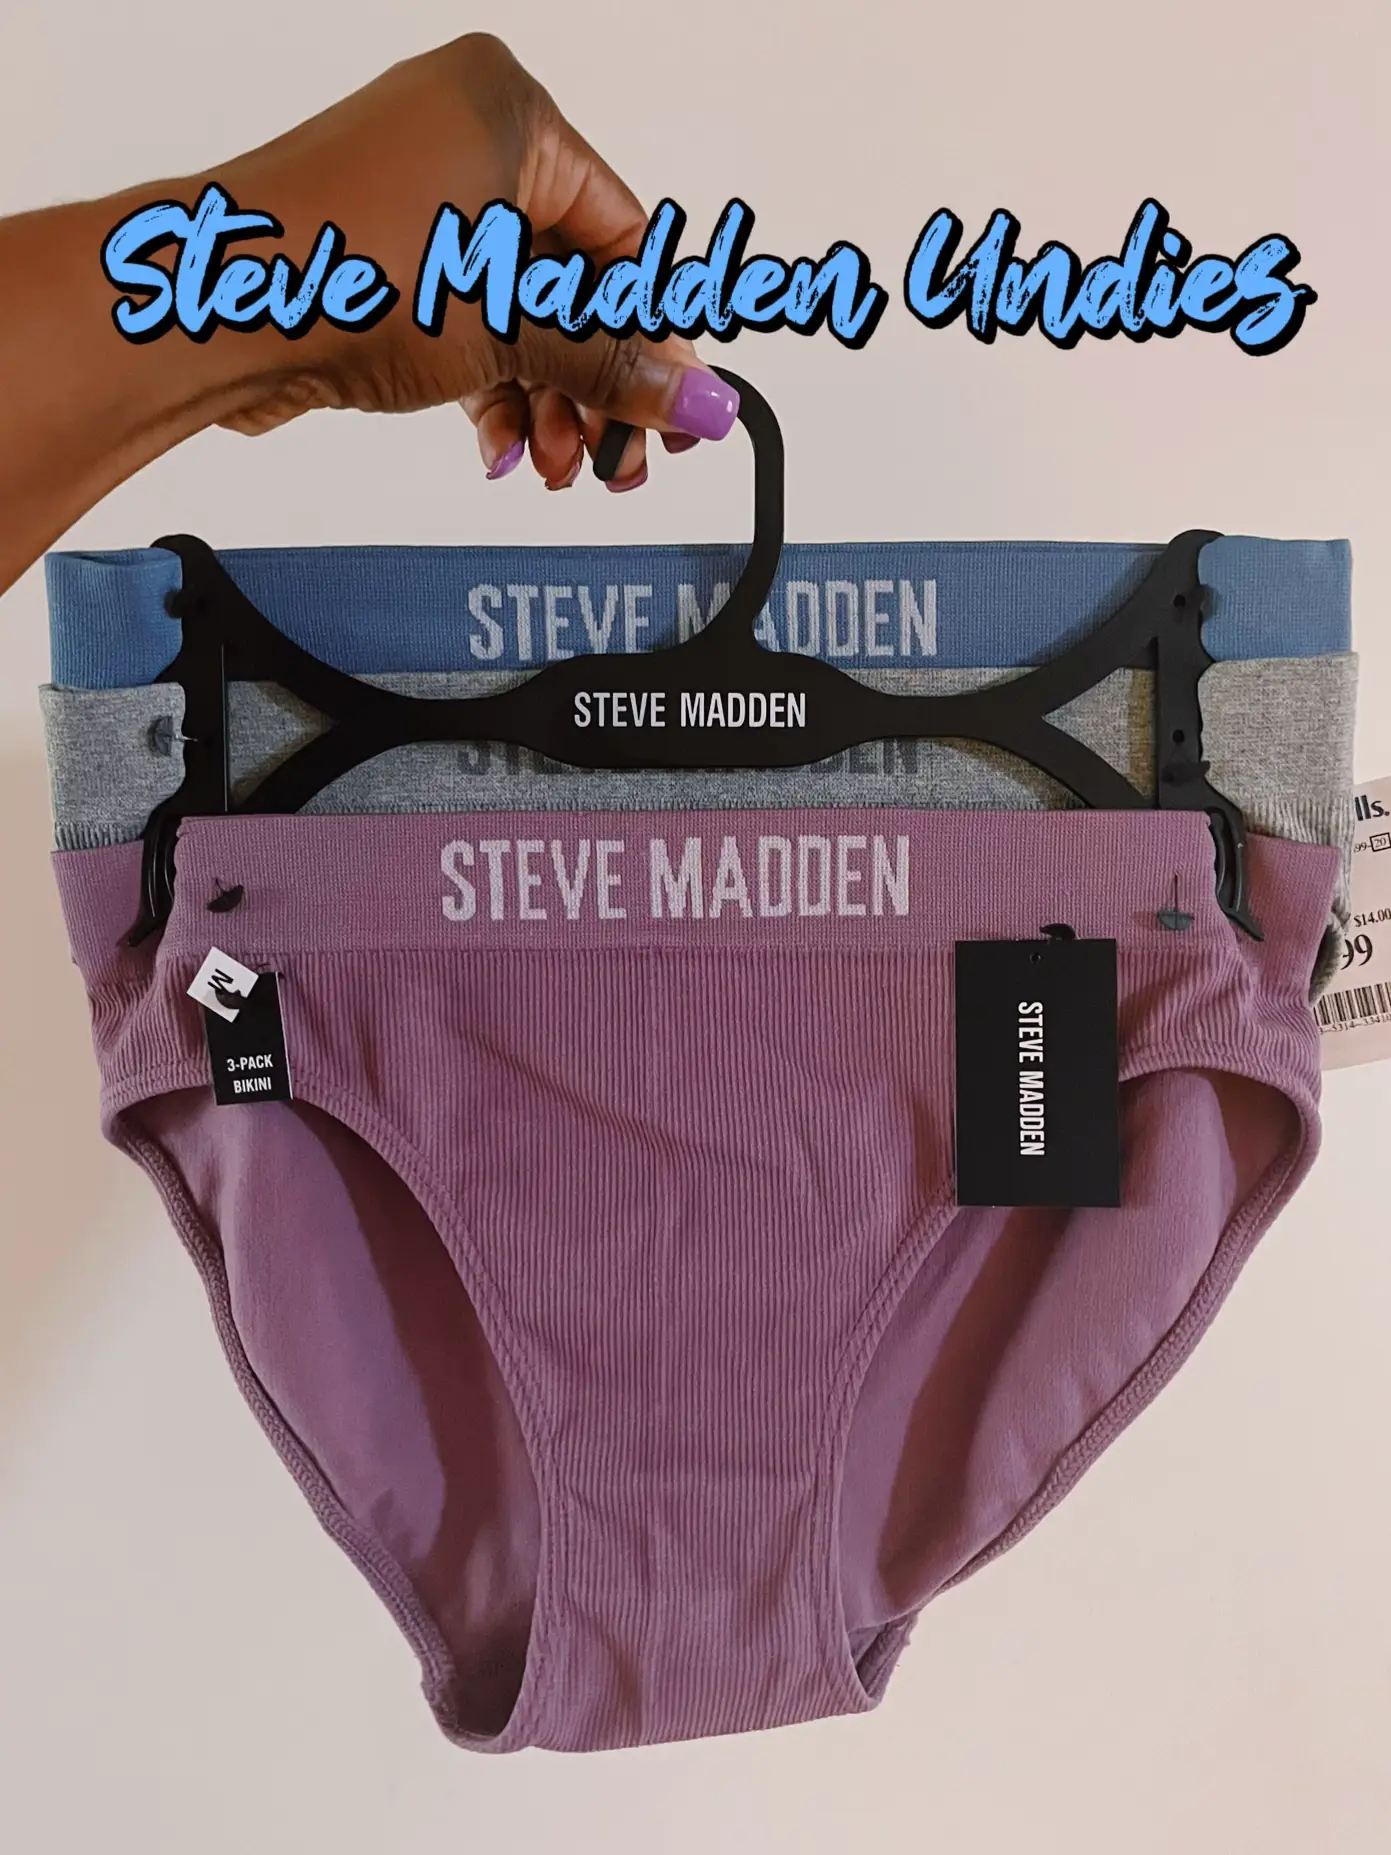 Steve Madden Undies, Gallery posted by MissBudgetFinds